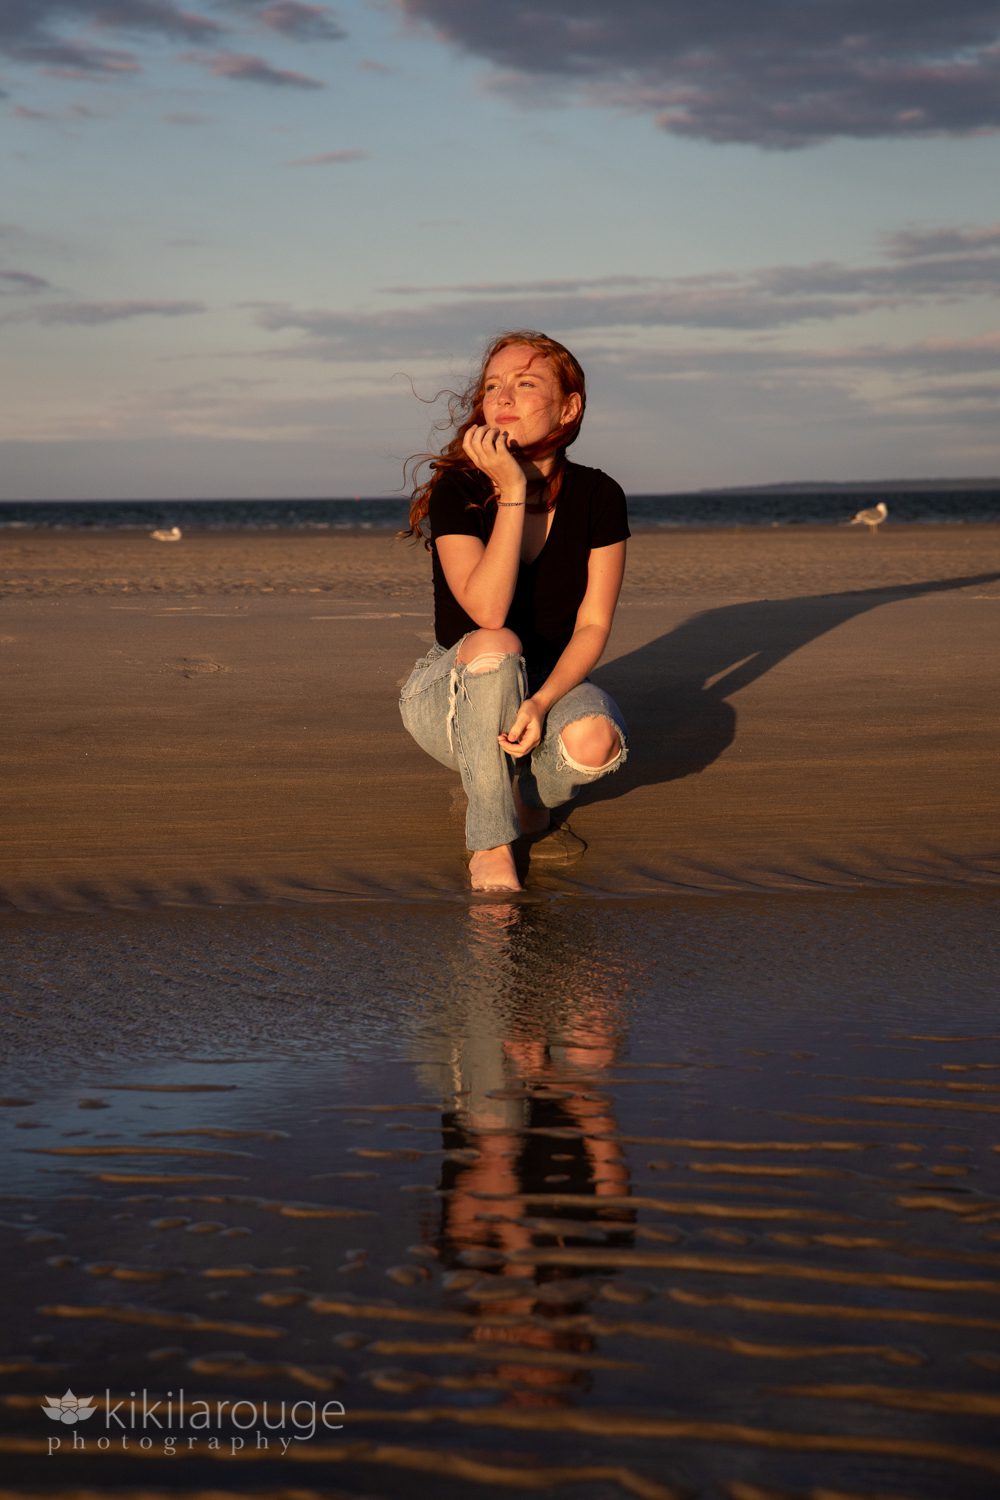 Redhead in ripped jeans black top by tidepool with reflection looking off at sunset hair blowing